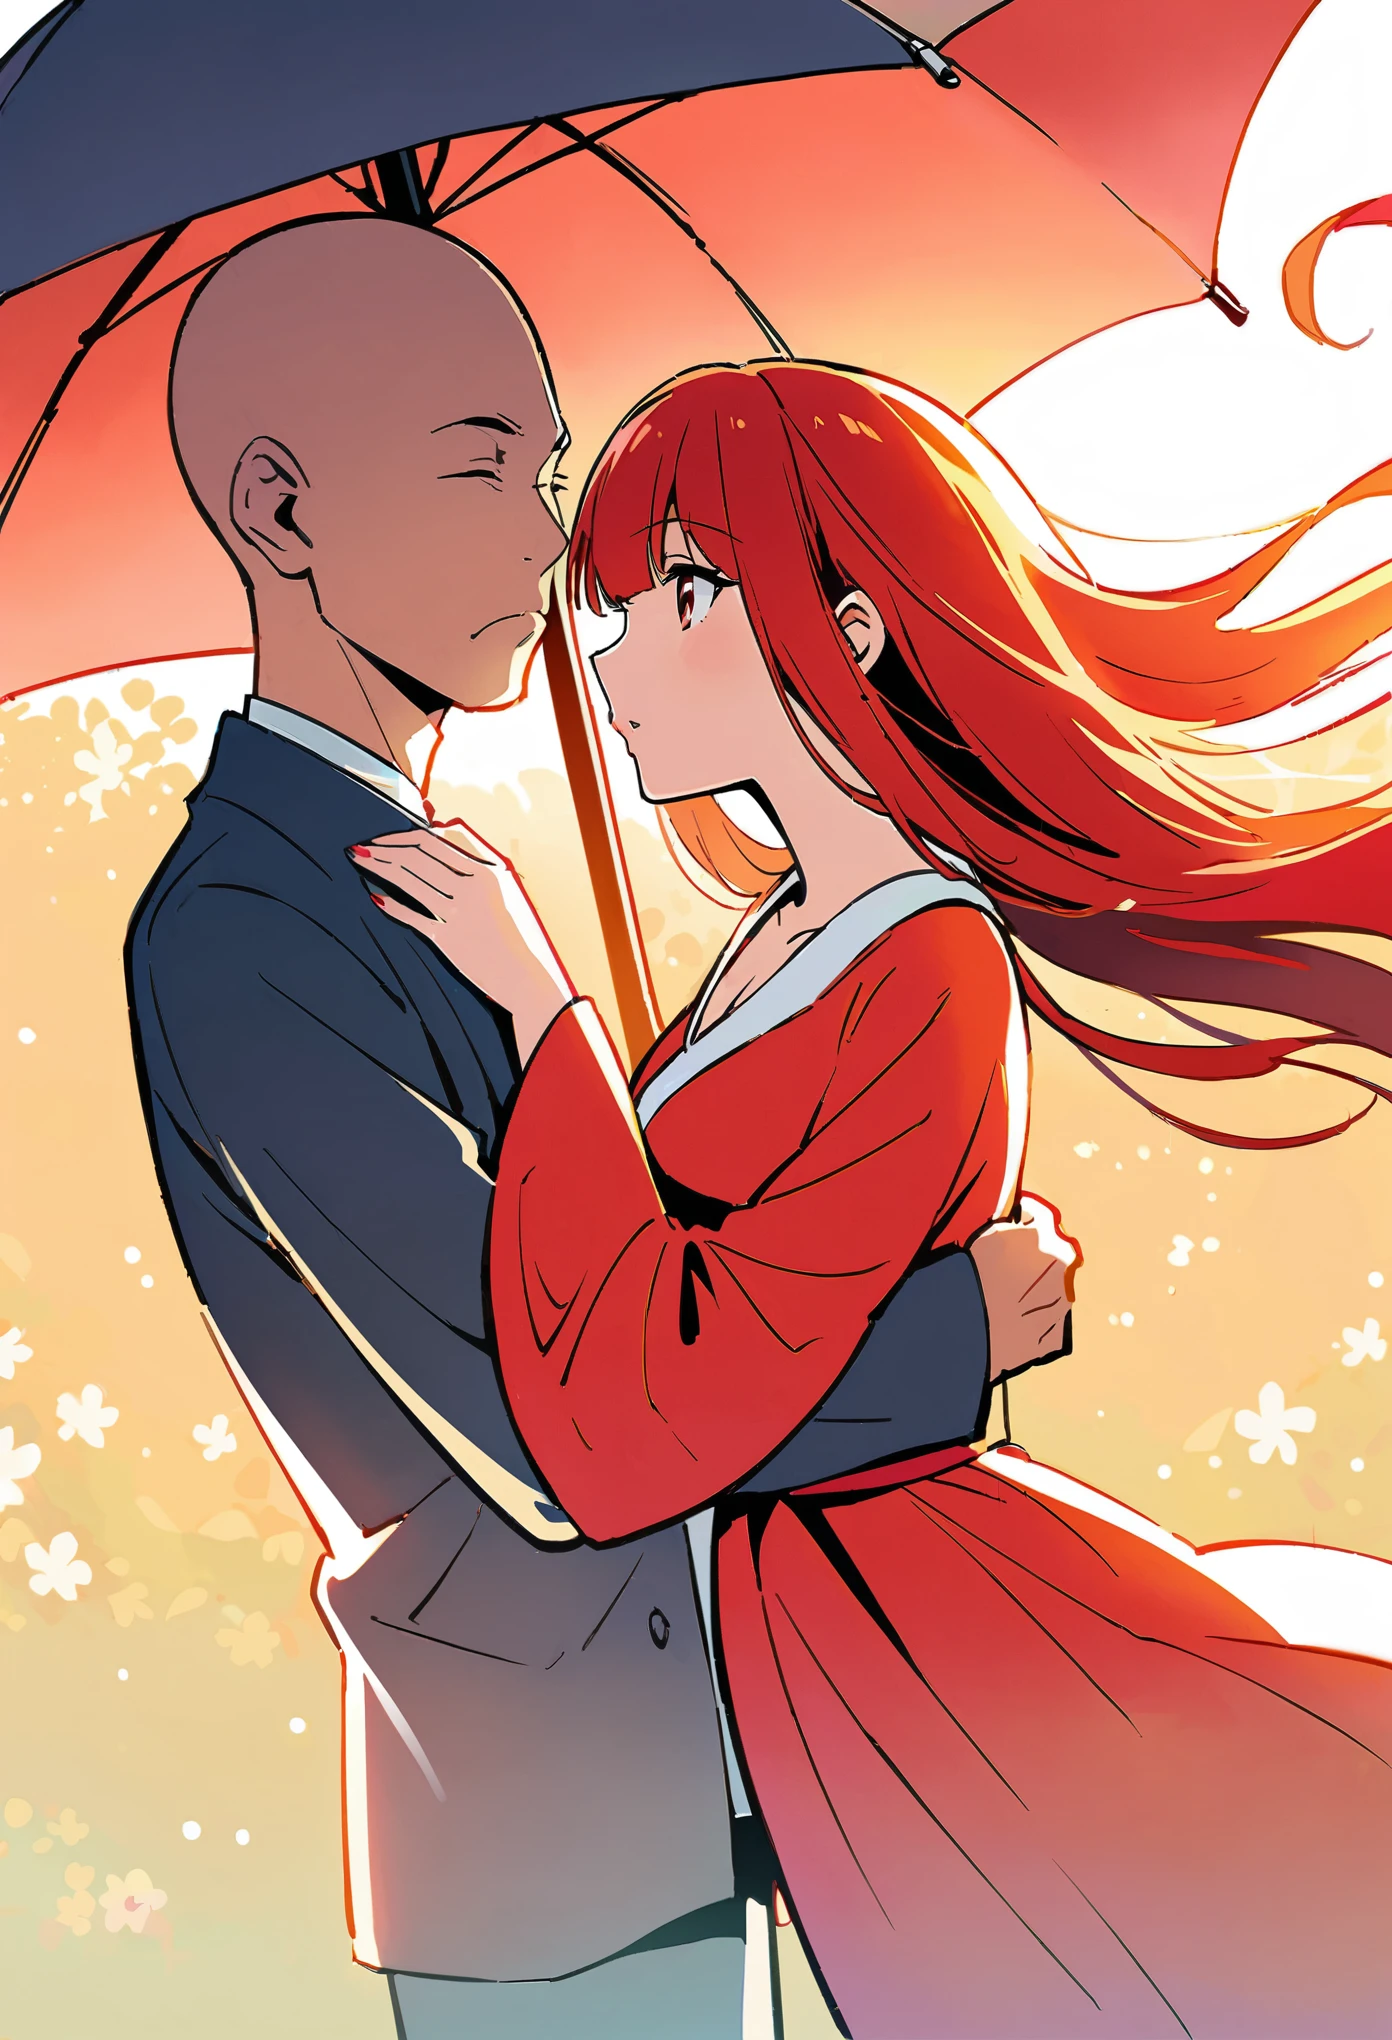 Chinese anime, a bald man and an elegant woman in red dress standing under the umbrella together, white background, in the style of Japanese comics .anime shounen illustration in the style of , an ancient bald man and beautiful woman in red dress stand under the umbrella together, he gently holds her head to his for a kiss, she wears very long hair in buns with bangs covering half of her face, wearing traditional , dreamy romantic atmosphere in full color